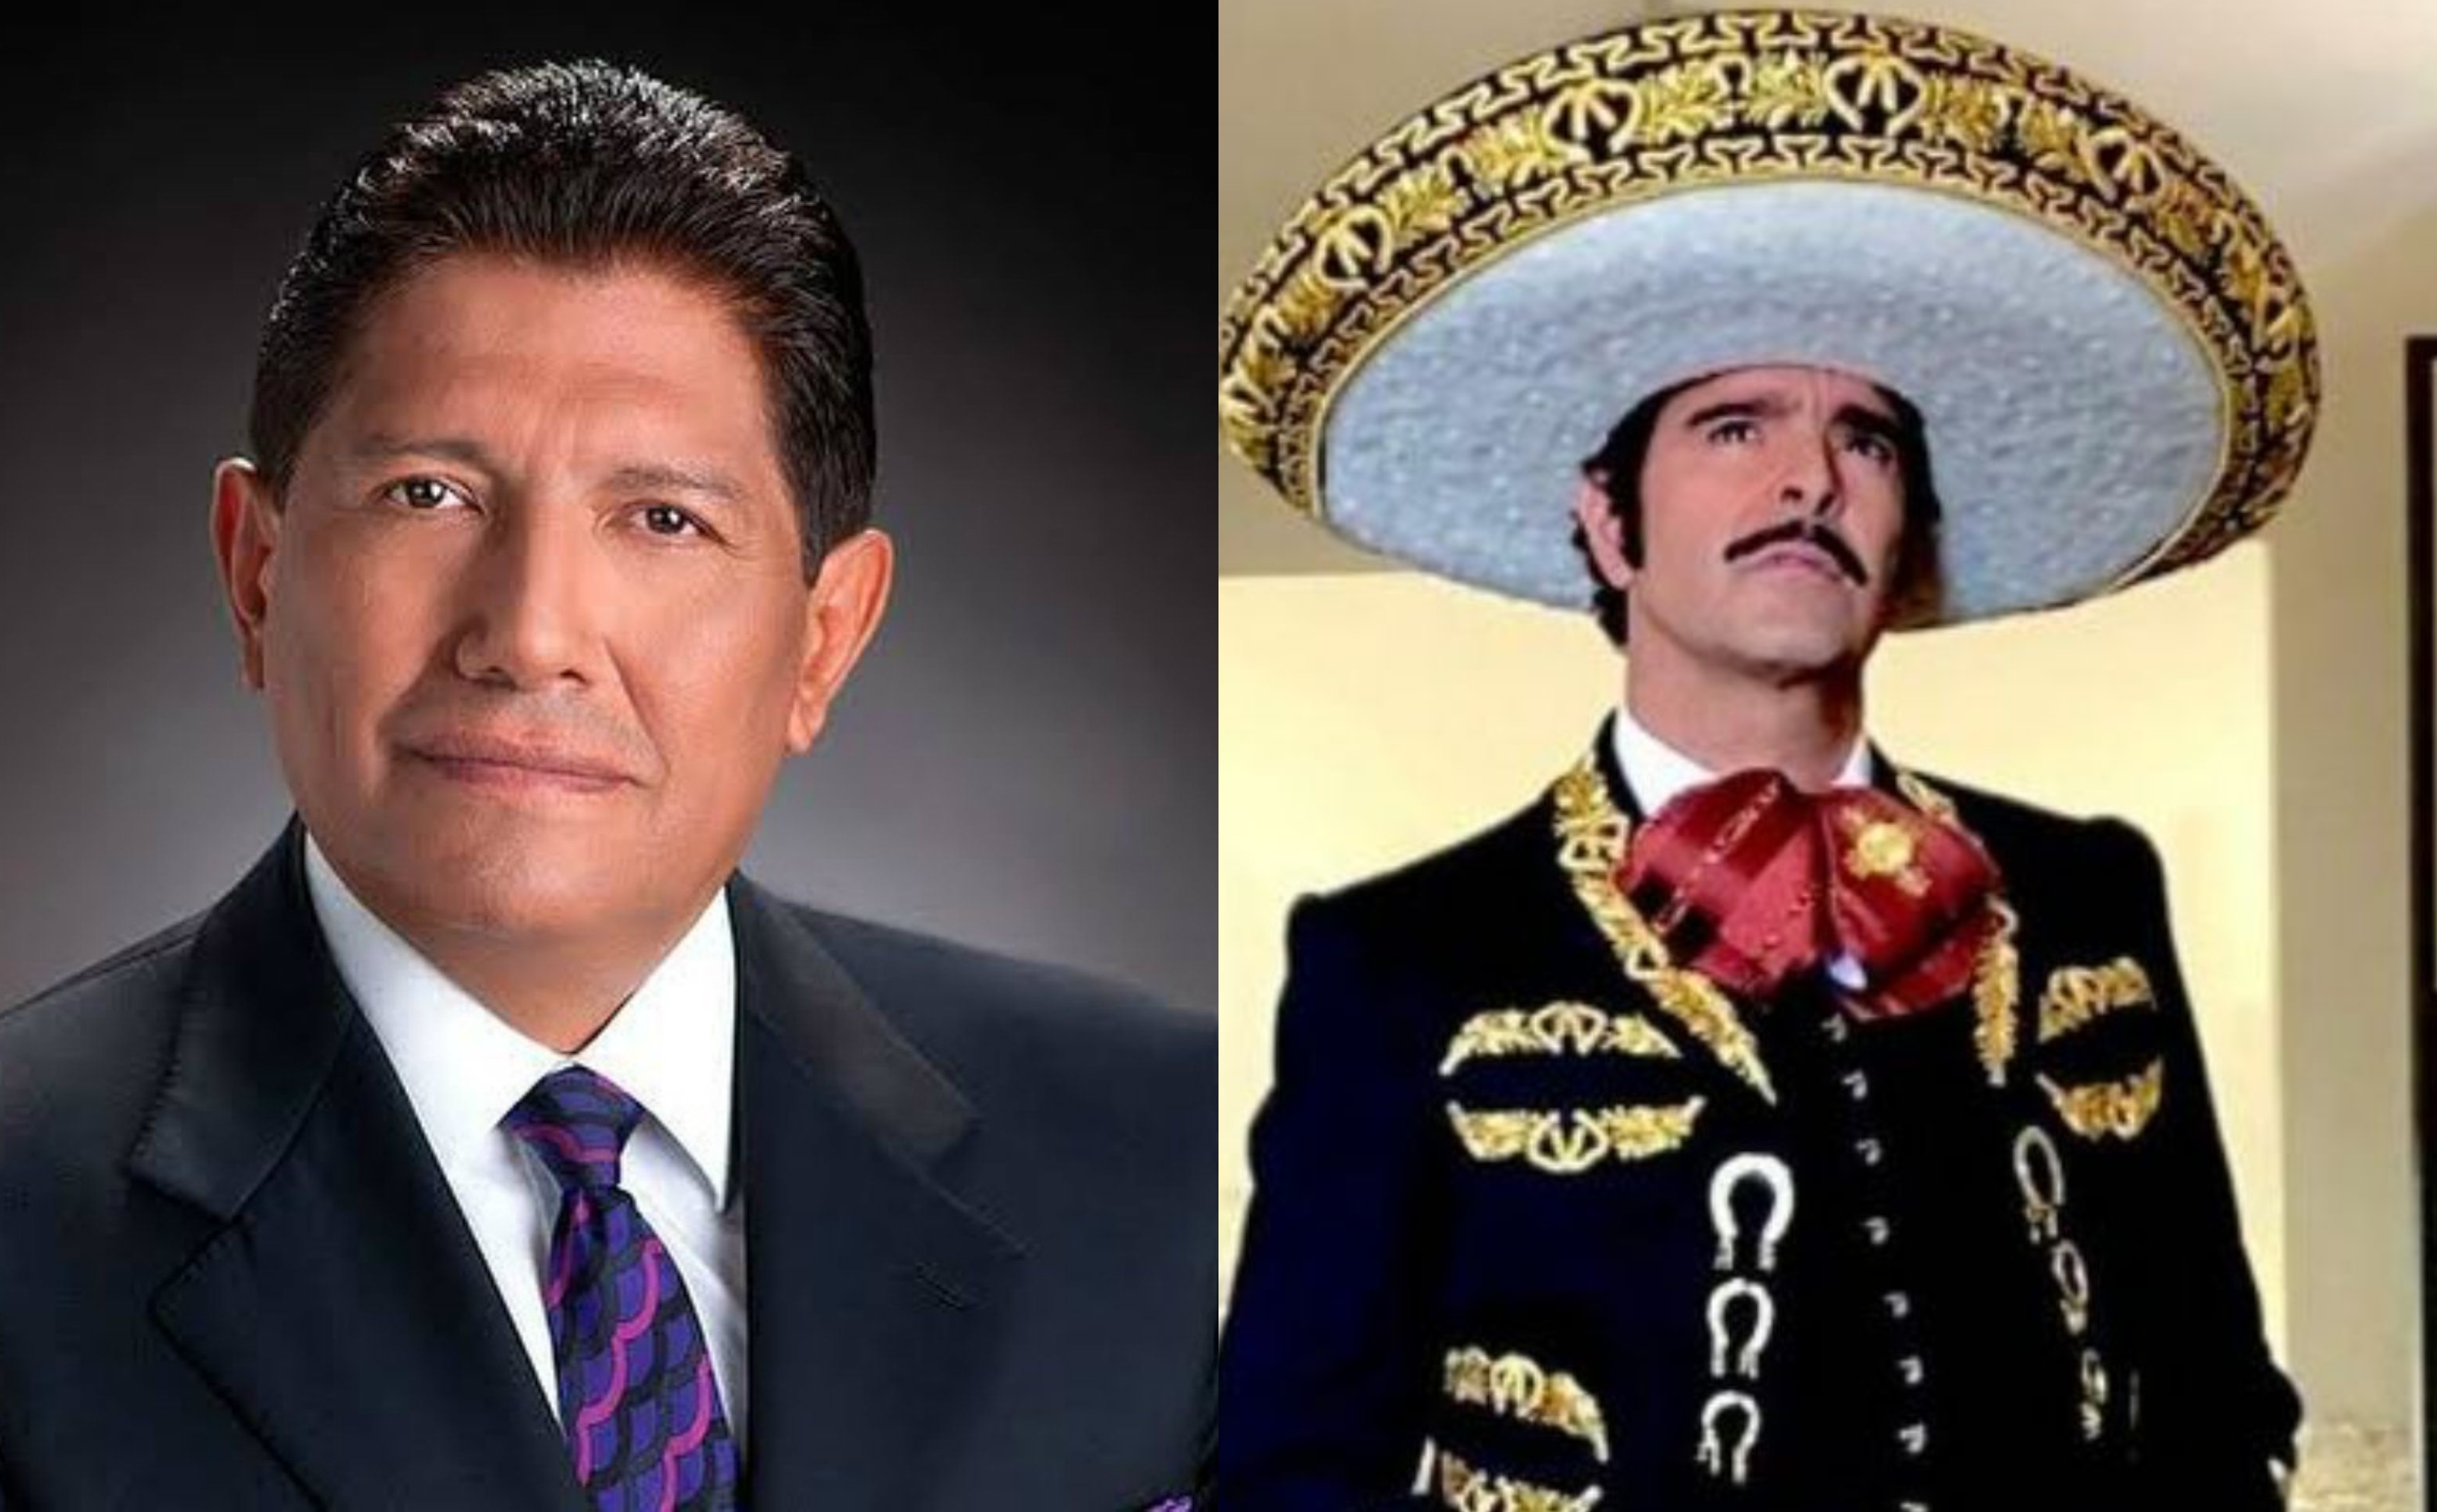 Juan Osorio supported Pablo Montero in his role as "Vicente Fernandez"However, the singer's attitudes disappointed him (Photo: Instagram)